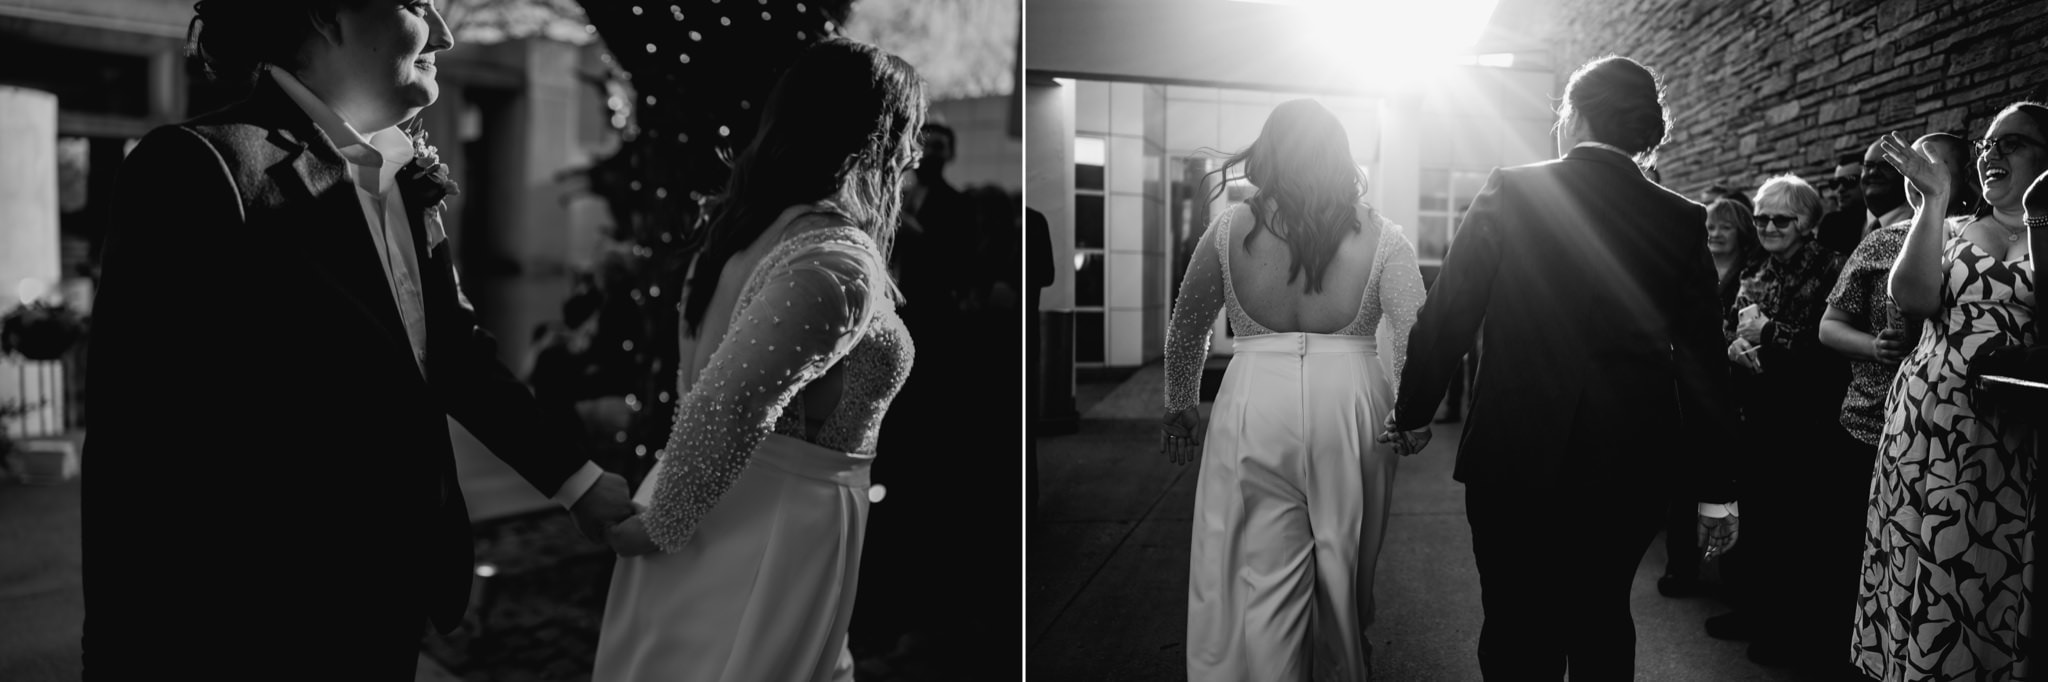 stunning black and white candid wedding photography